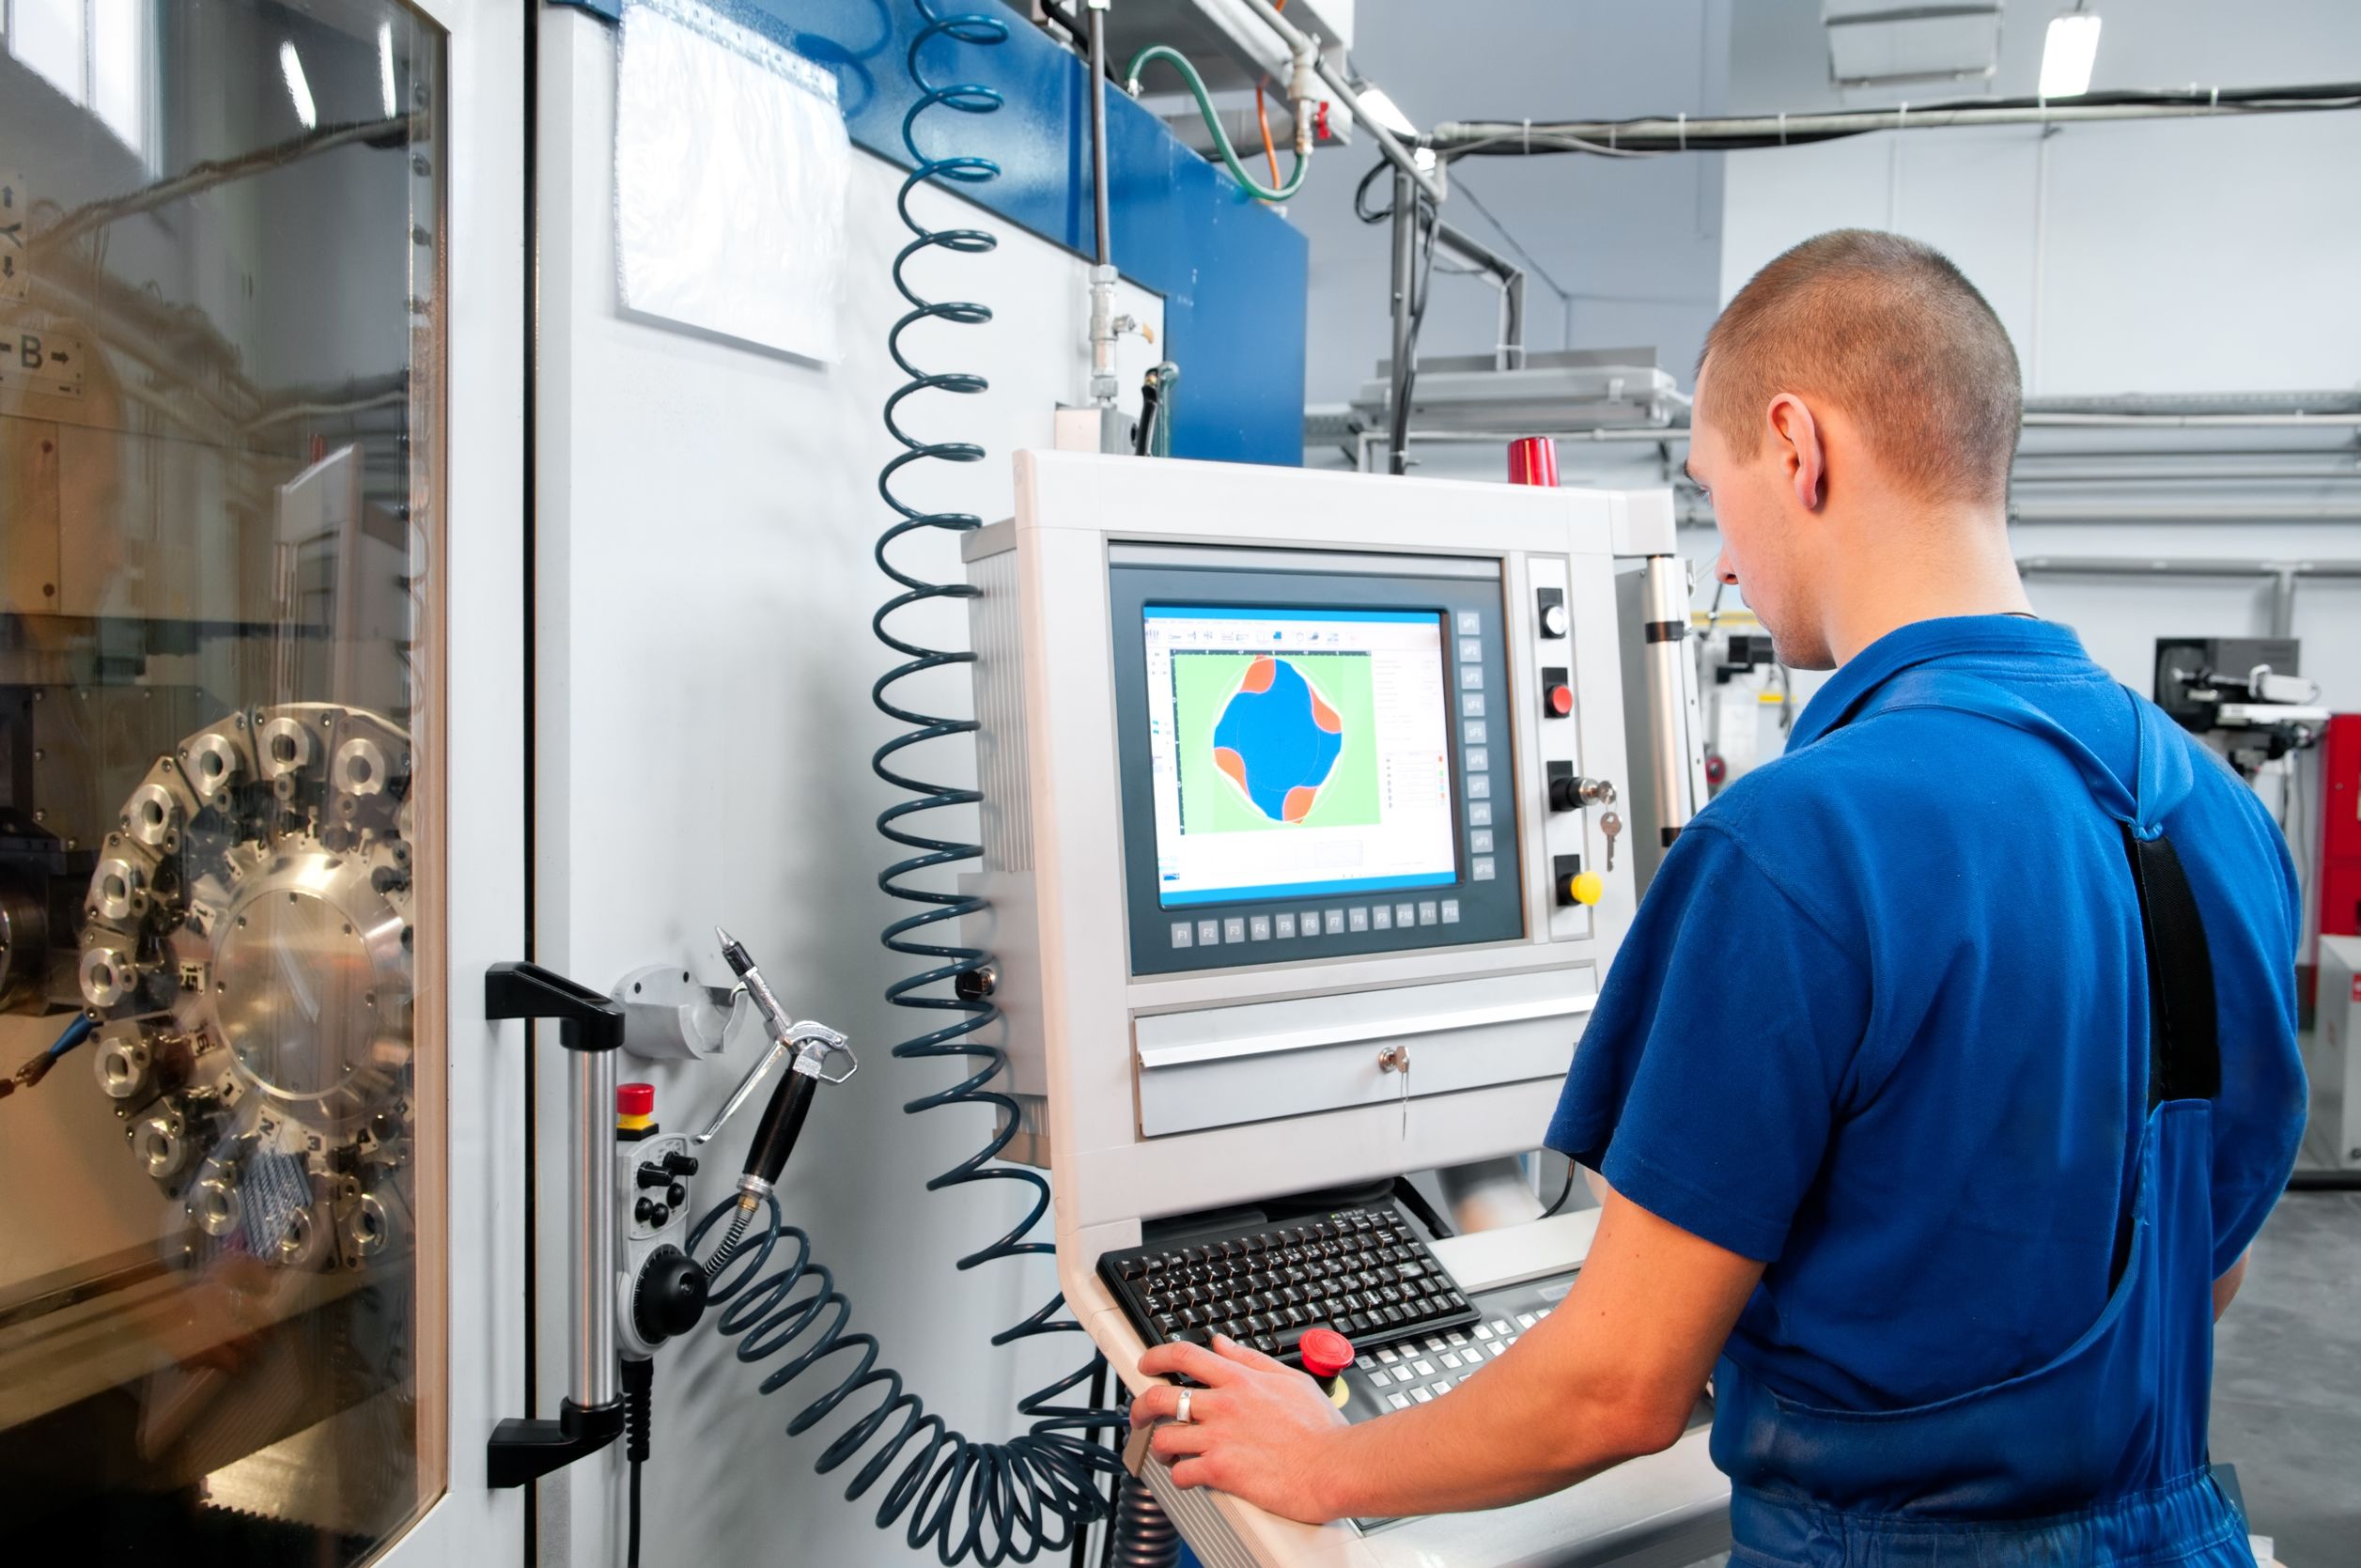 MFG Day 2020 – Timing is Right to Attract Next Generation’s Talents